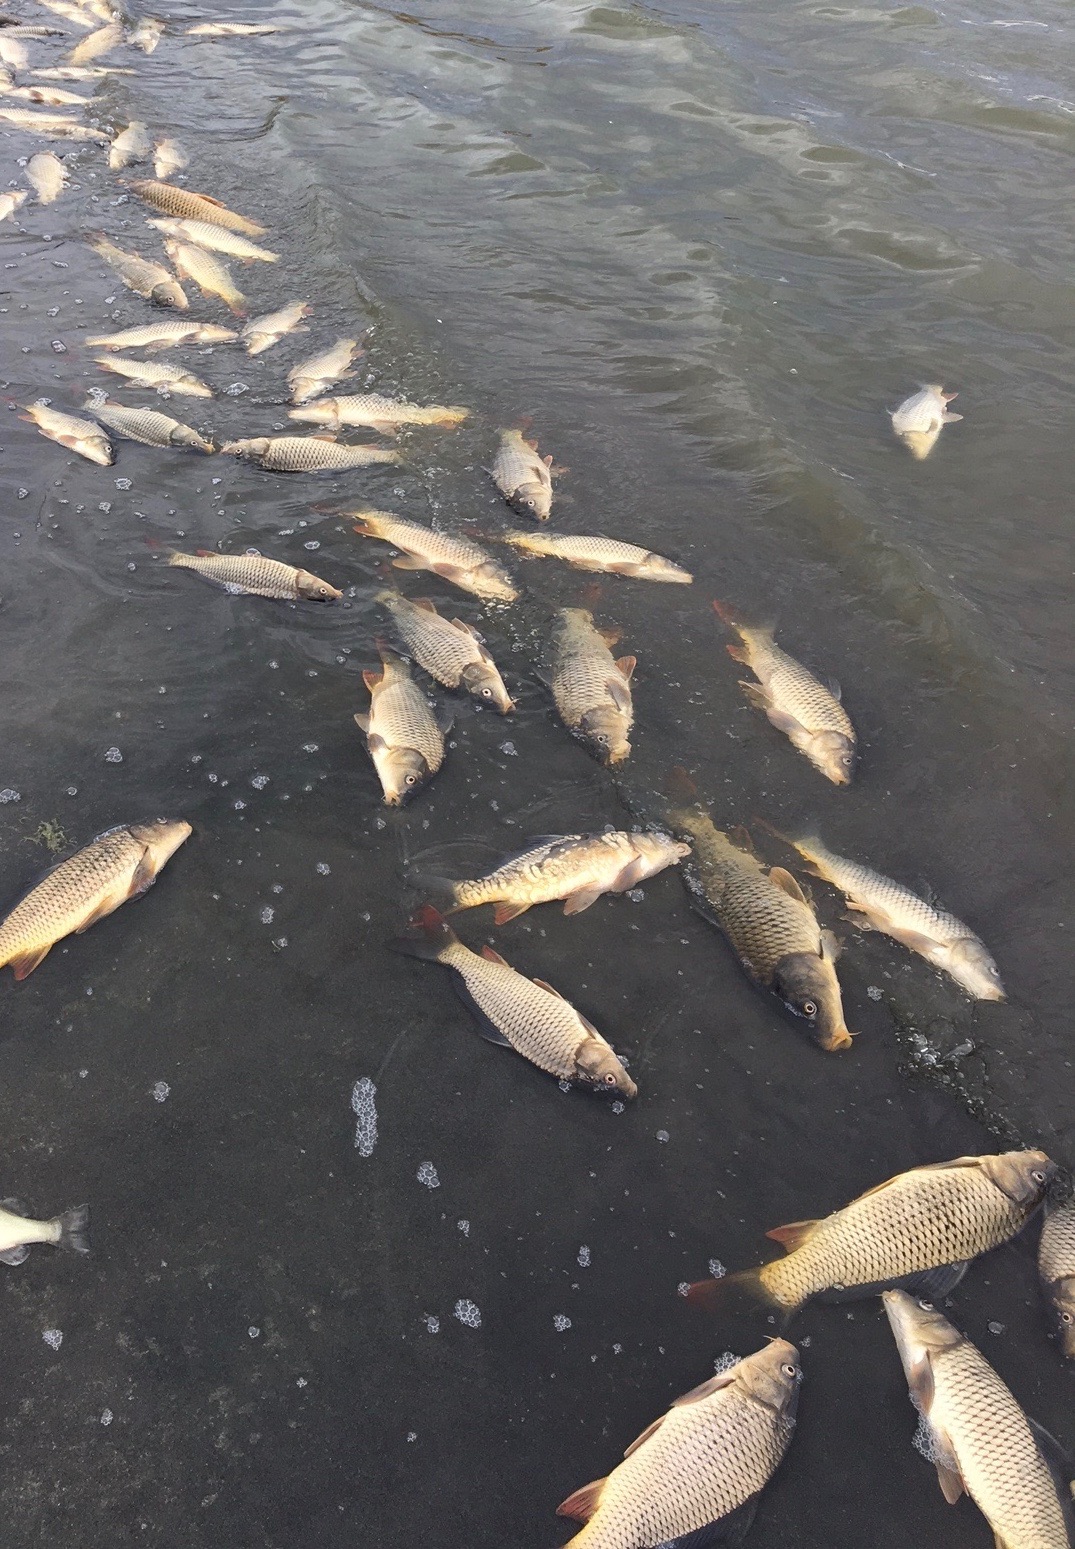 Carp killed by rotenone during fish restoration project at Bruneau Dunes State Park